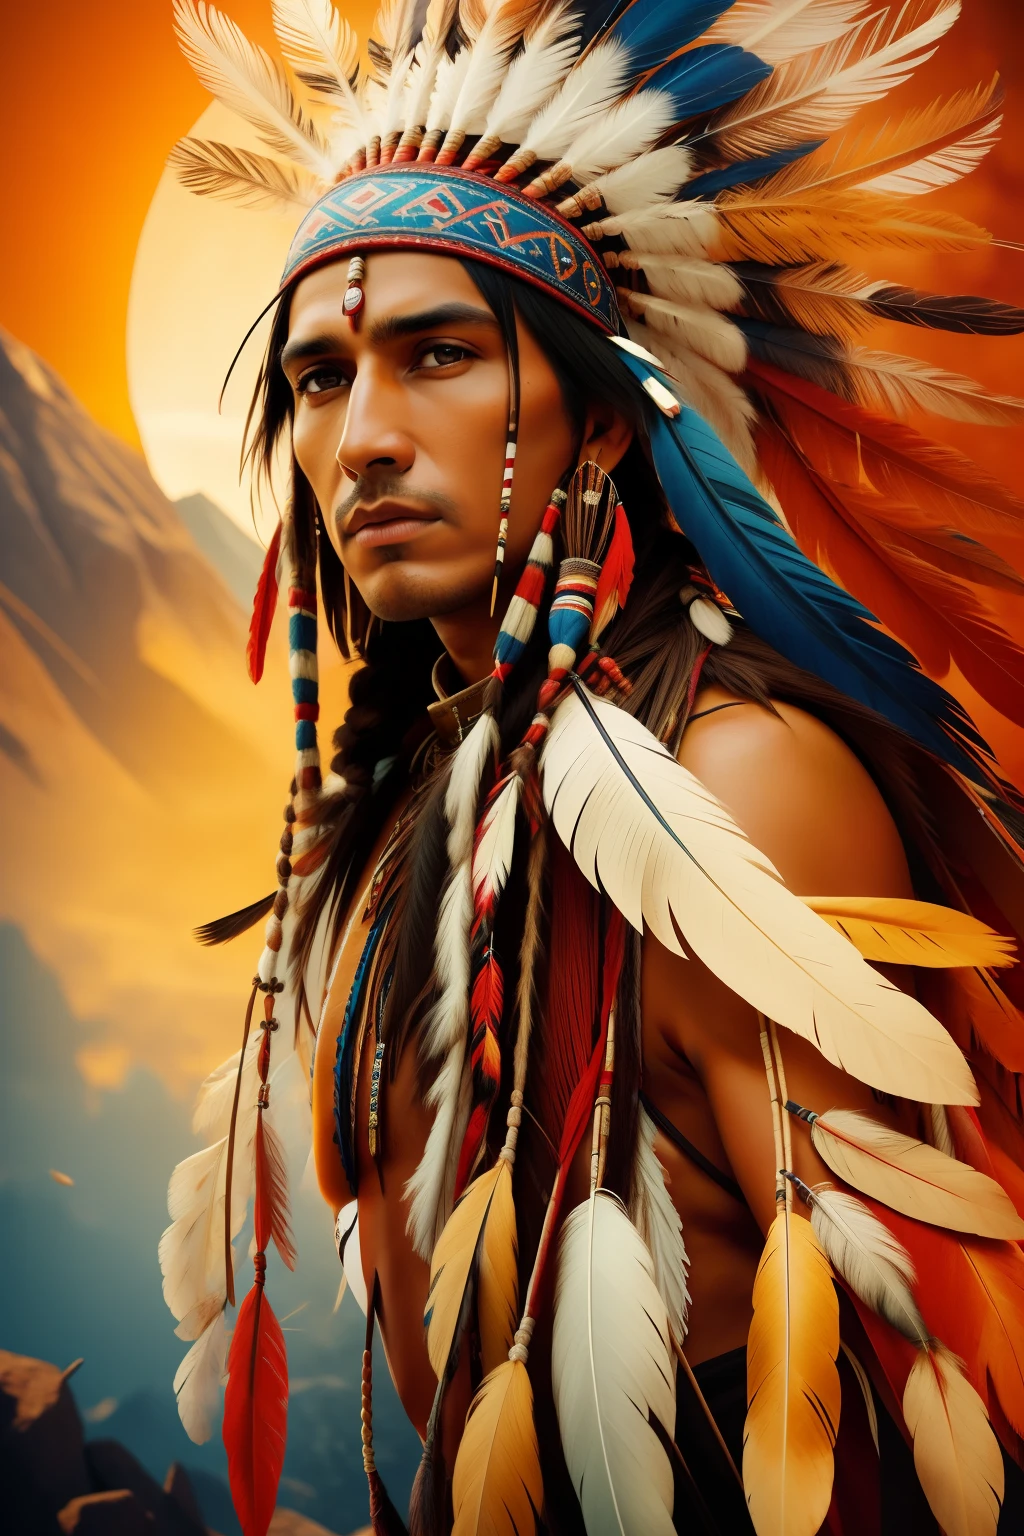 Hyperrealistic cinematic image of a native Indian with feathers on his head, native art americana, Indian warrior, native american, native american warrior, native art, a native american warrior, indigenous man, eagle feather, skilled warrior of the apache, warrior spirit, american indian headdress, indigenous art, : native american shamen fantasy, Indigenous, native american folk art, Arte indiana fotrrealisitic, fot, Masterpiece artwork, realisitic, 真实感, rendering, hight contrast, digital art photographyrealistic trend in Artstation 8k HD high definition detailed realistic,  detailded, texture skin, hiper detailded, textura de pele realisitic, armour, best qualityer, ultra high-resolution, (fotrrealisitic: 1.4), high resolution, detailded, Gross draft, sharp re, by lee jeffries Nikon D850 Film Stock Photography 4 Kodak Portra 400 F1 Lens.6 Rich Colors Realistic Texture Dramatic Texture Dramatic Lighting Irrealengine Trend on Artstation Cinestill 800